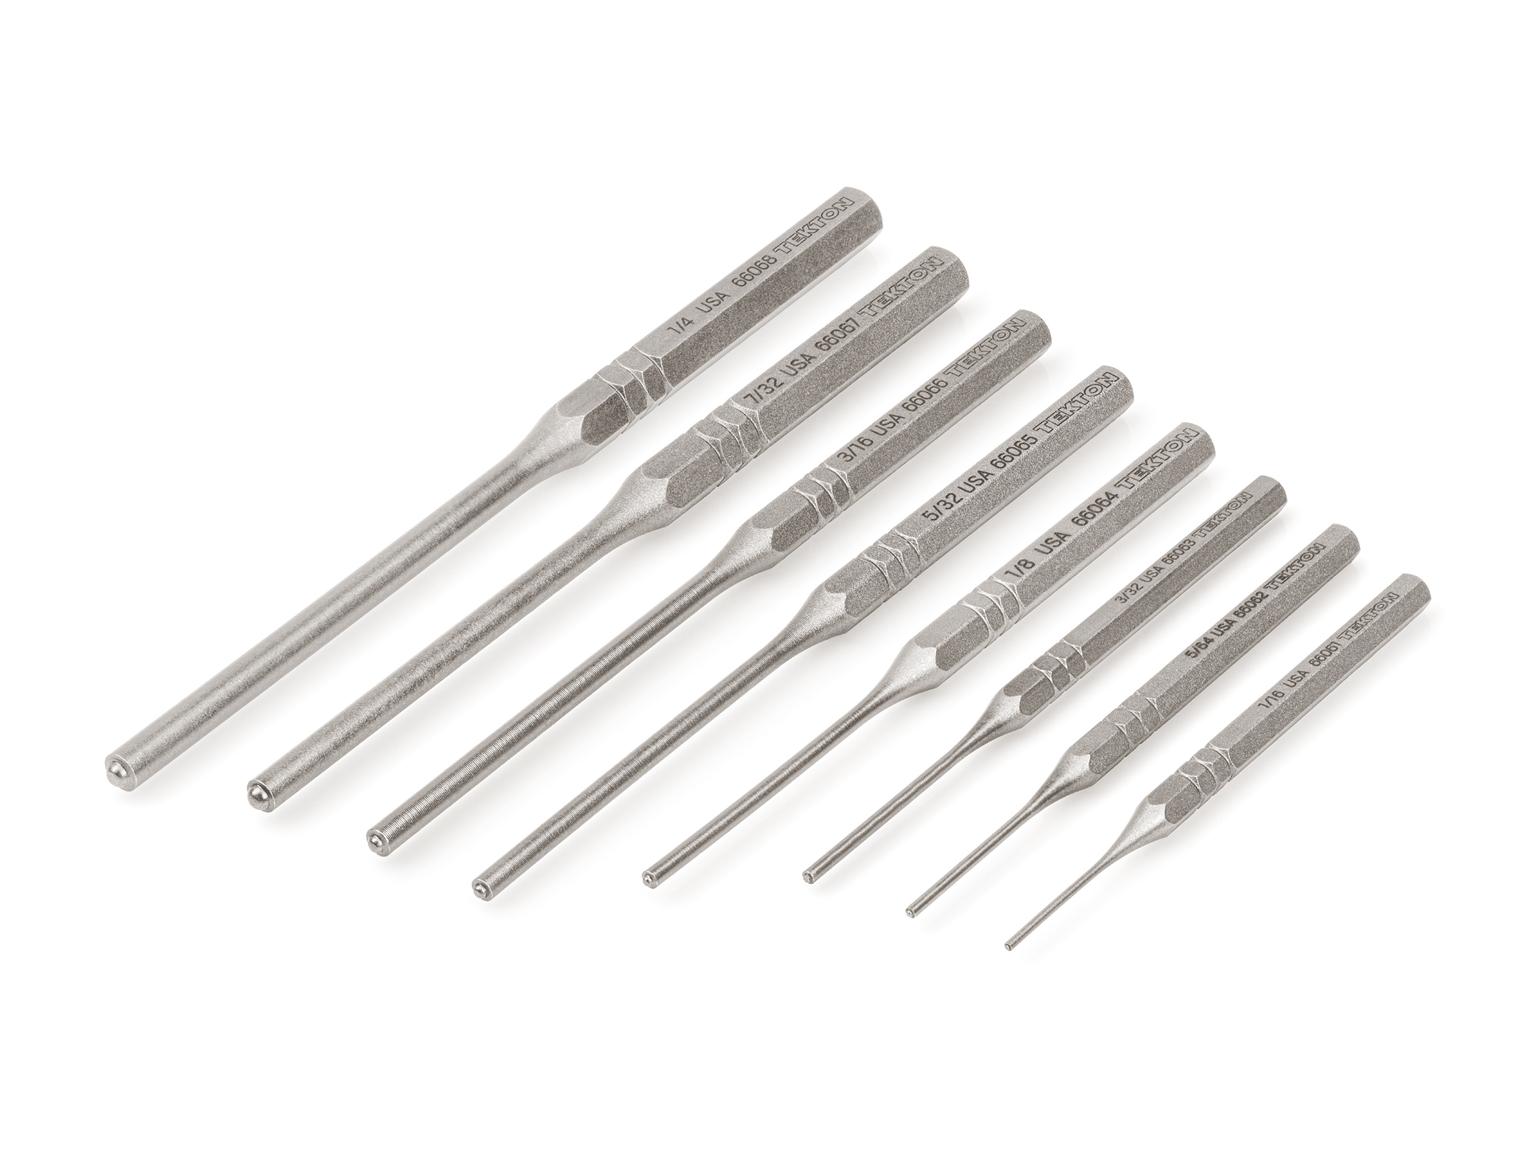 TEKTON PNC93001-T Roll Pin Punch Set, 8-Piece (1/16-1/4 in.)